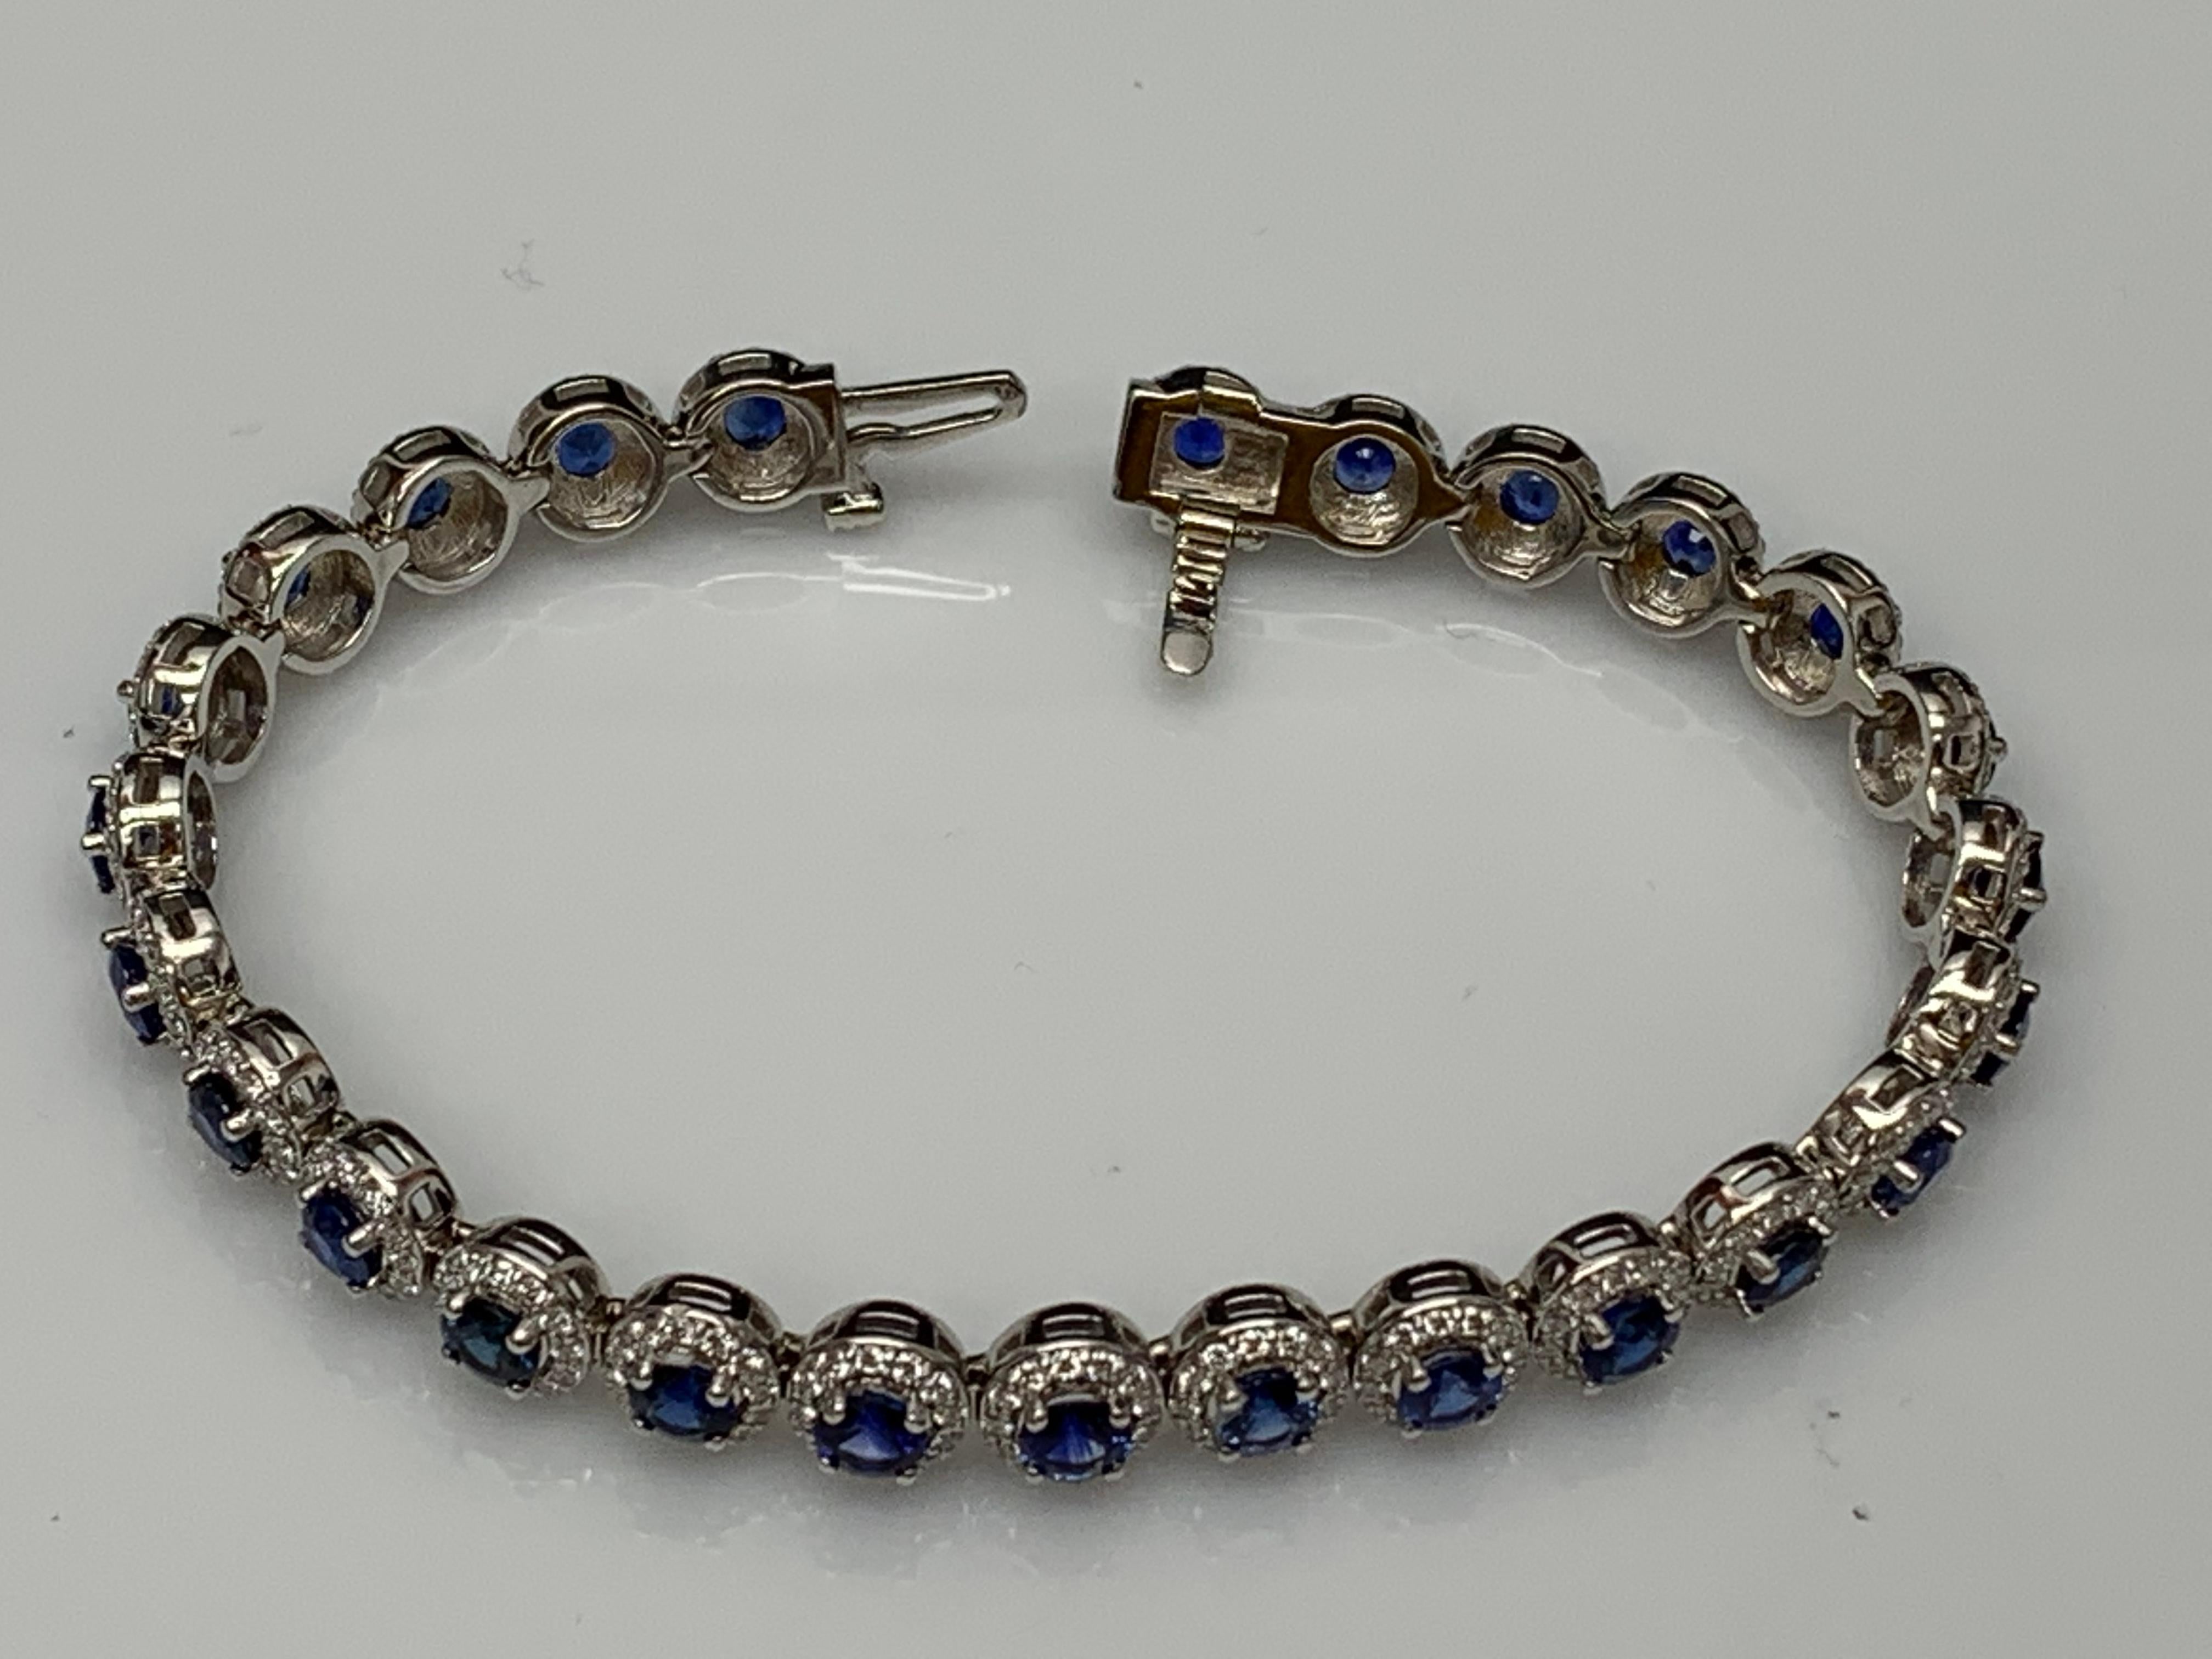 7.47 Carat Blue Sapphire and Diamond Halo Tennis Bracelet in 14k White Gold For Sale 7